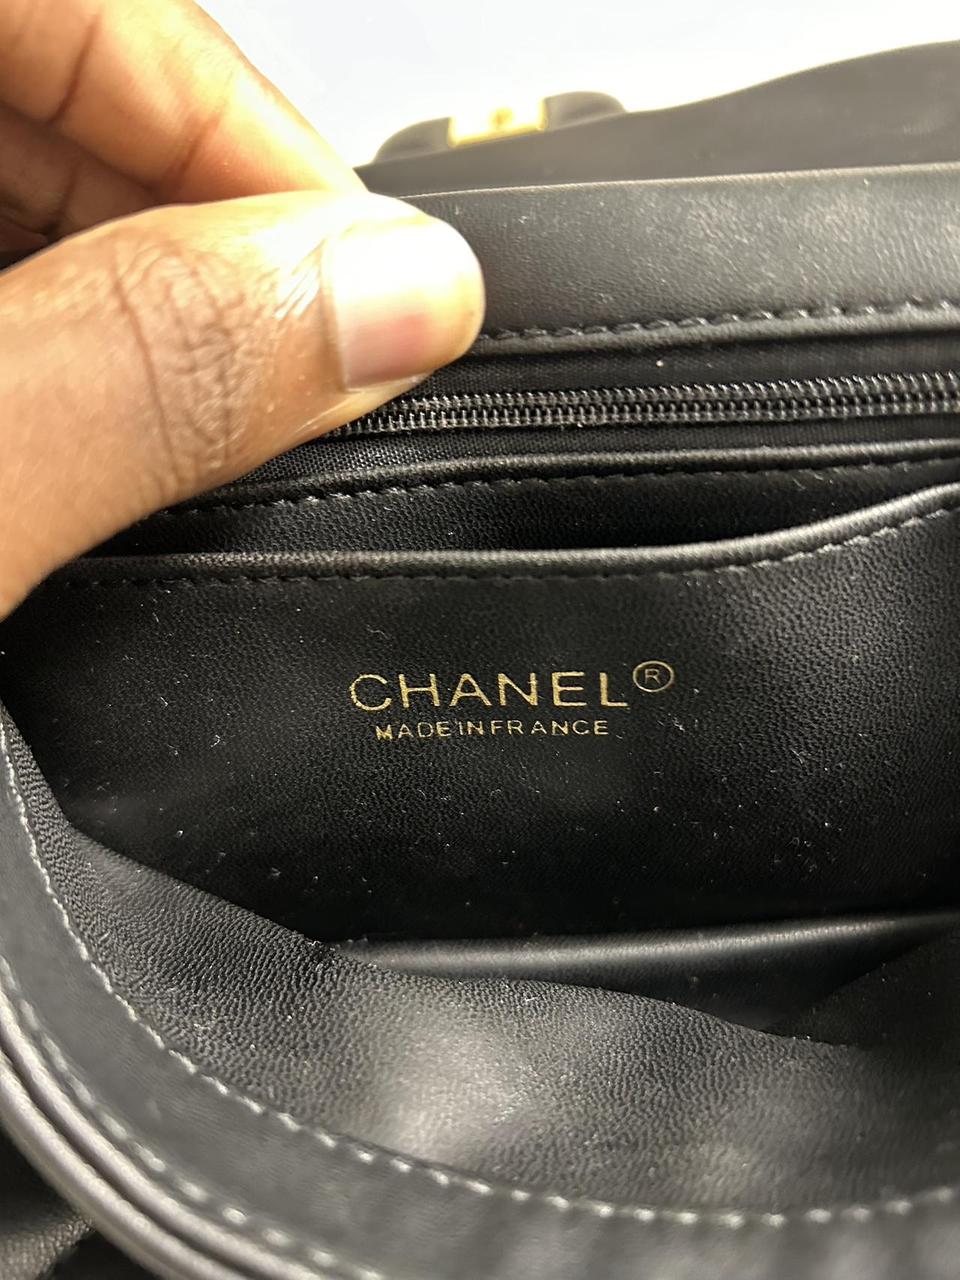 Chanel small classic hand bag Sold for 5000 - Depop